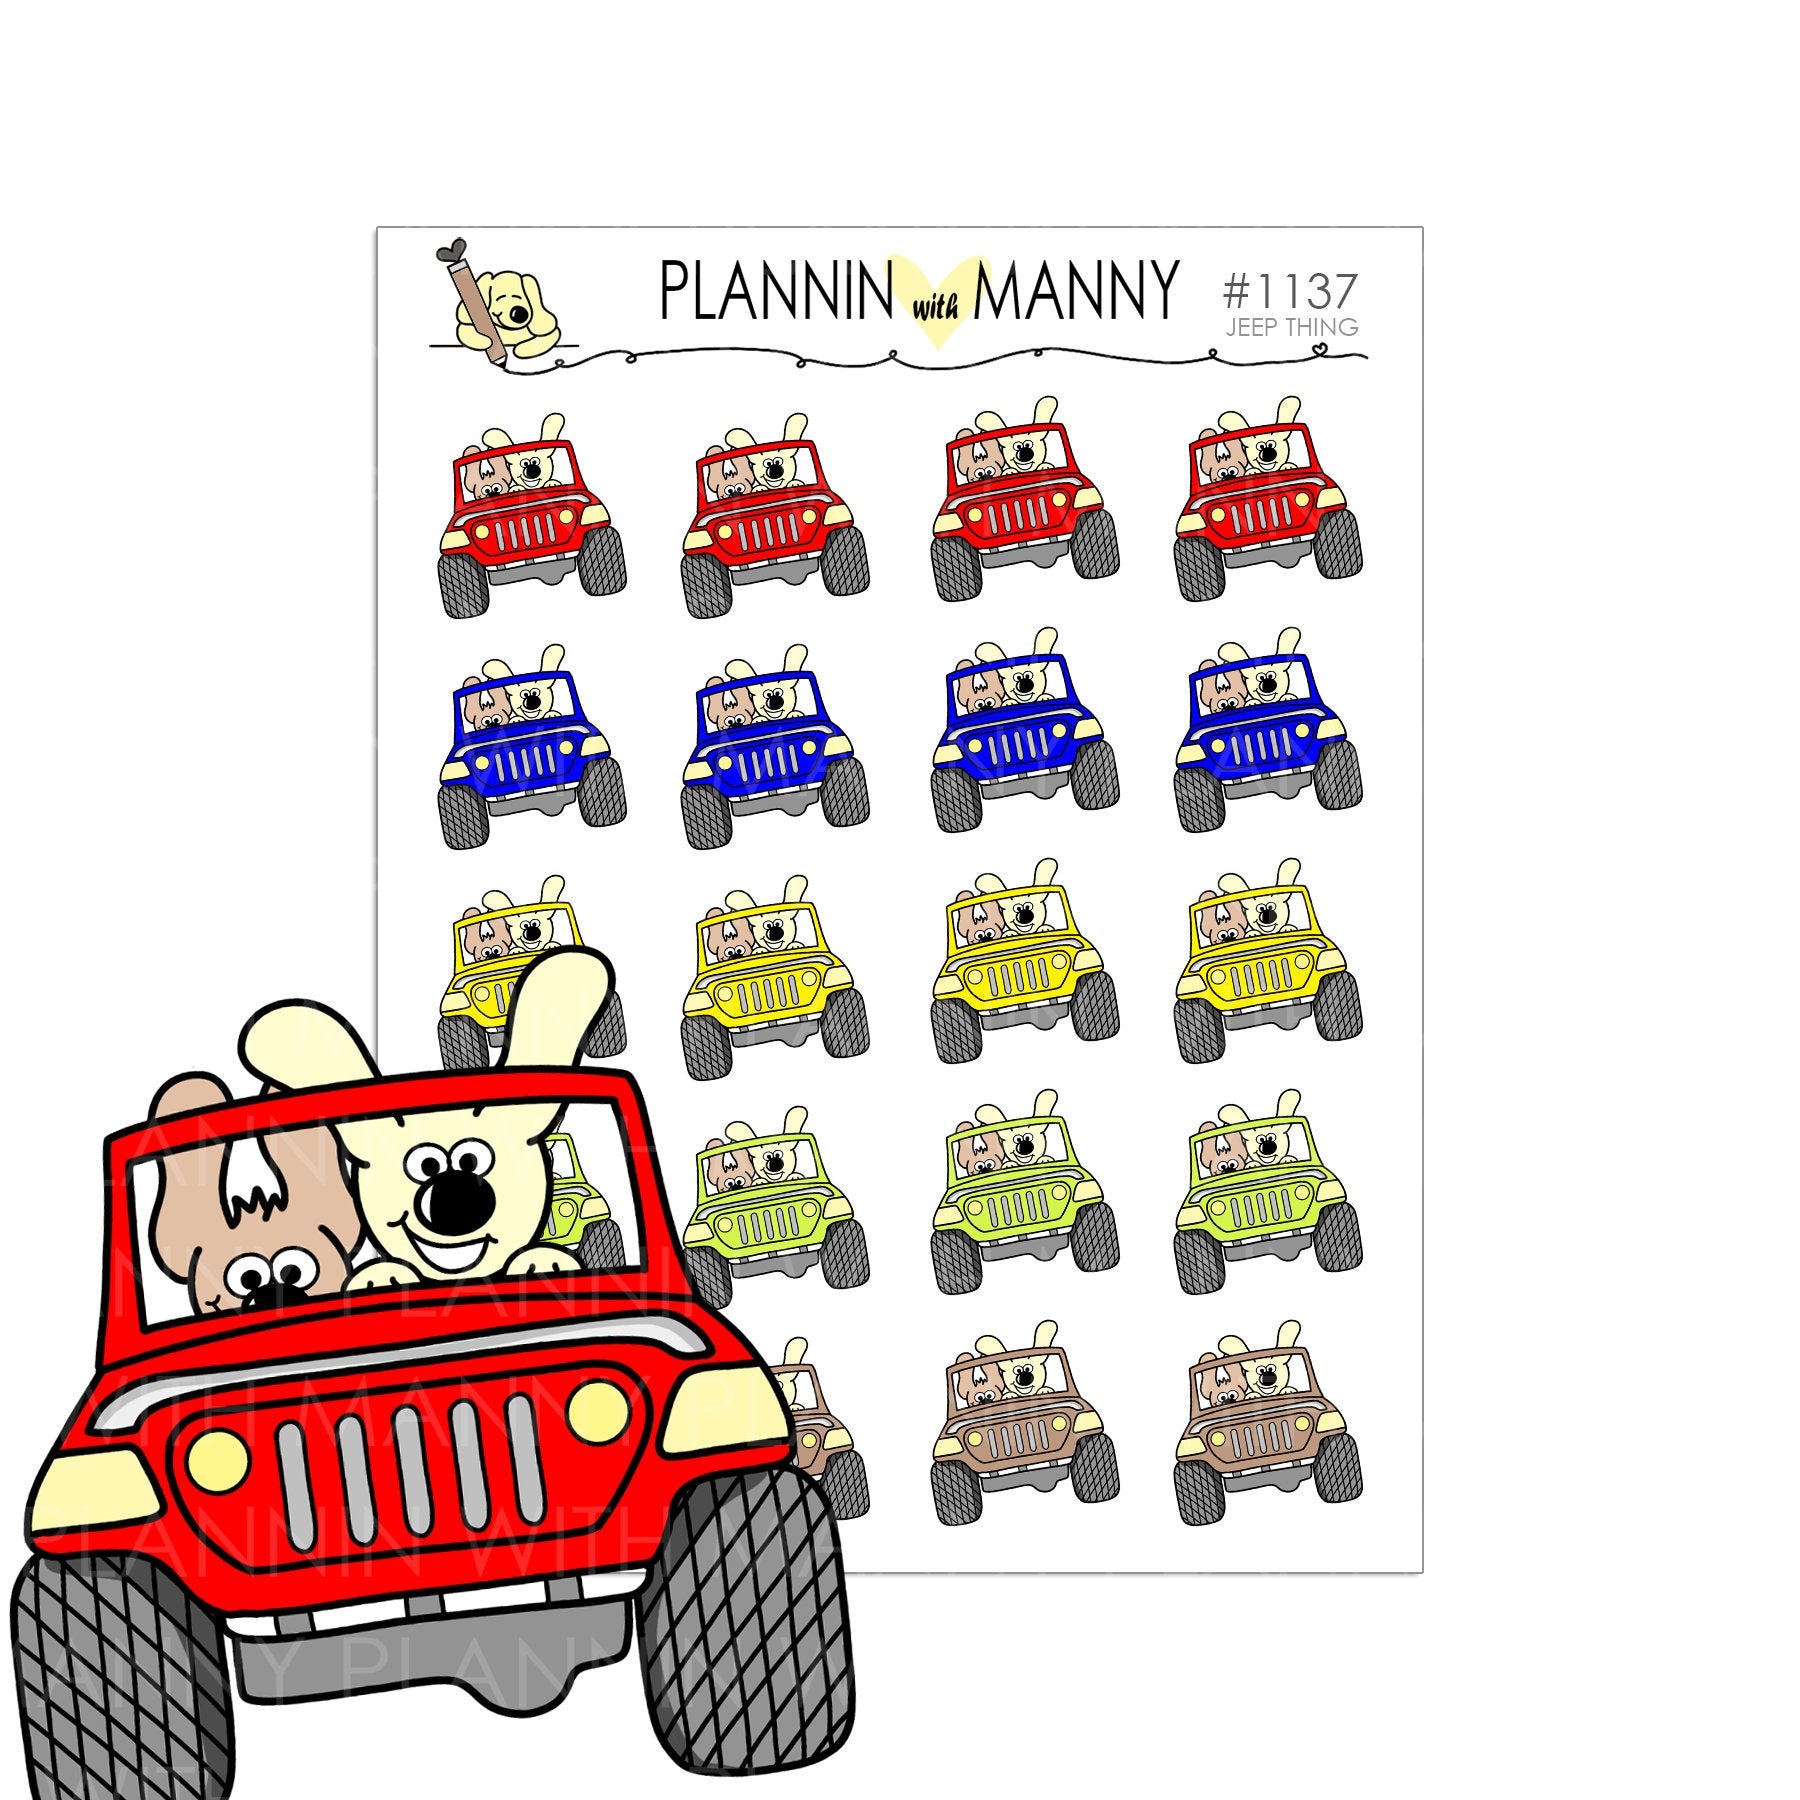 1137 JEEP THING Manny Planner Stickers